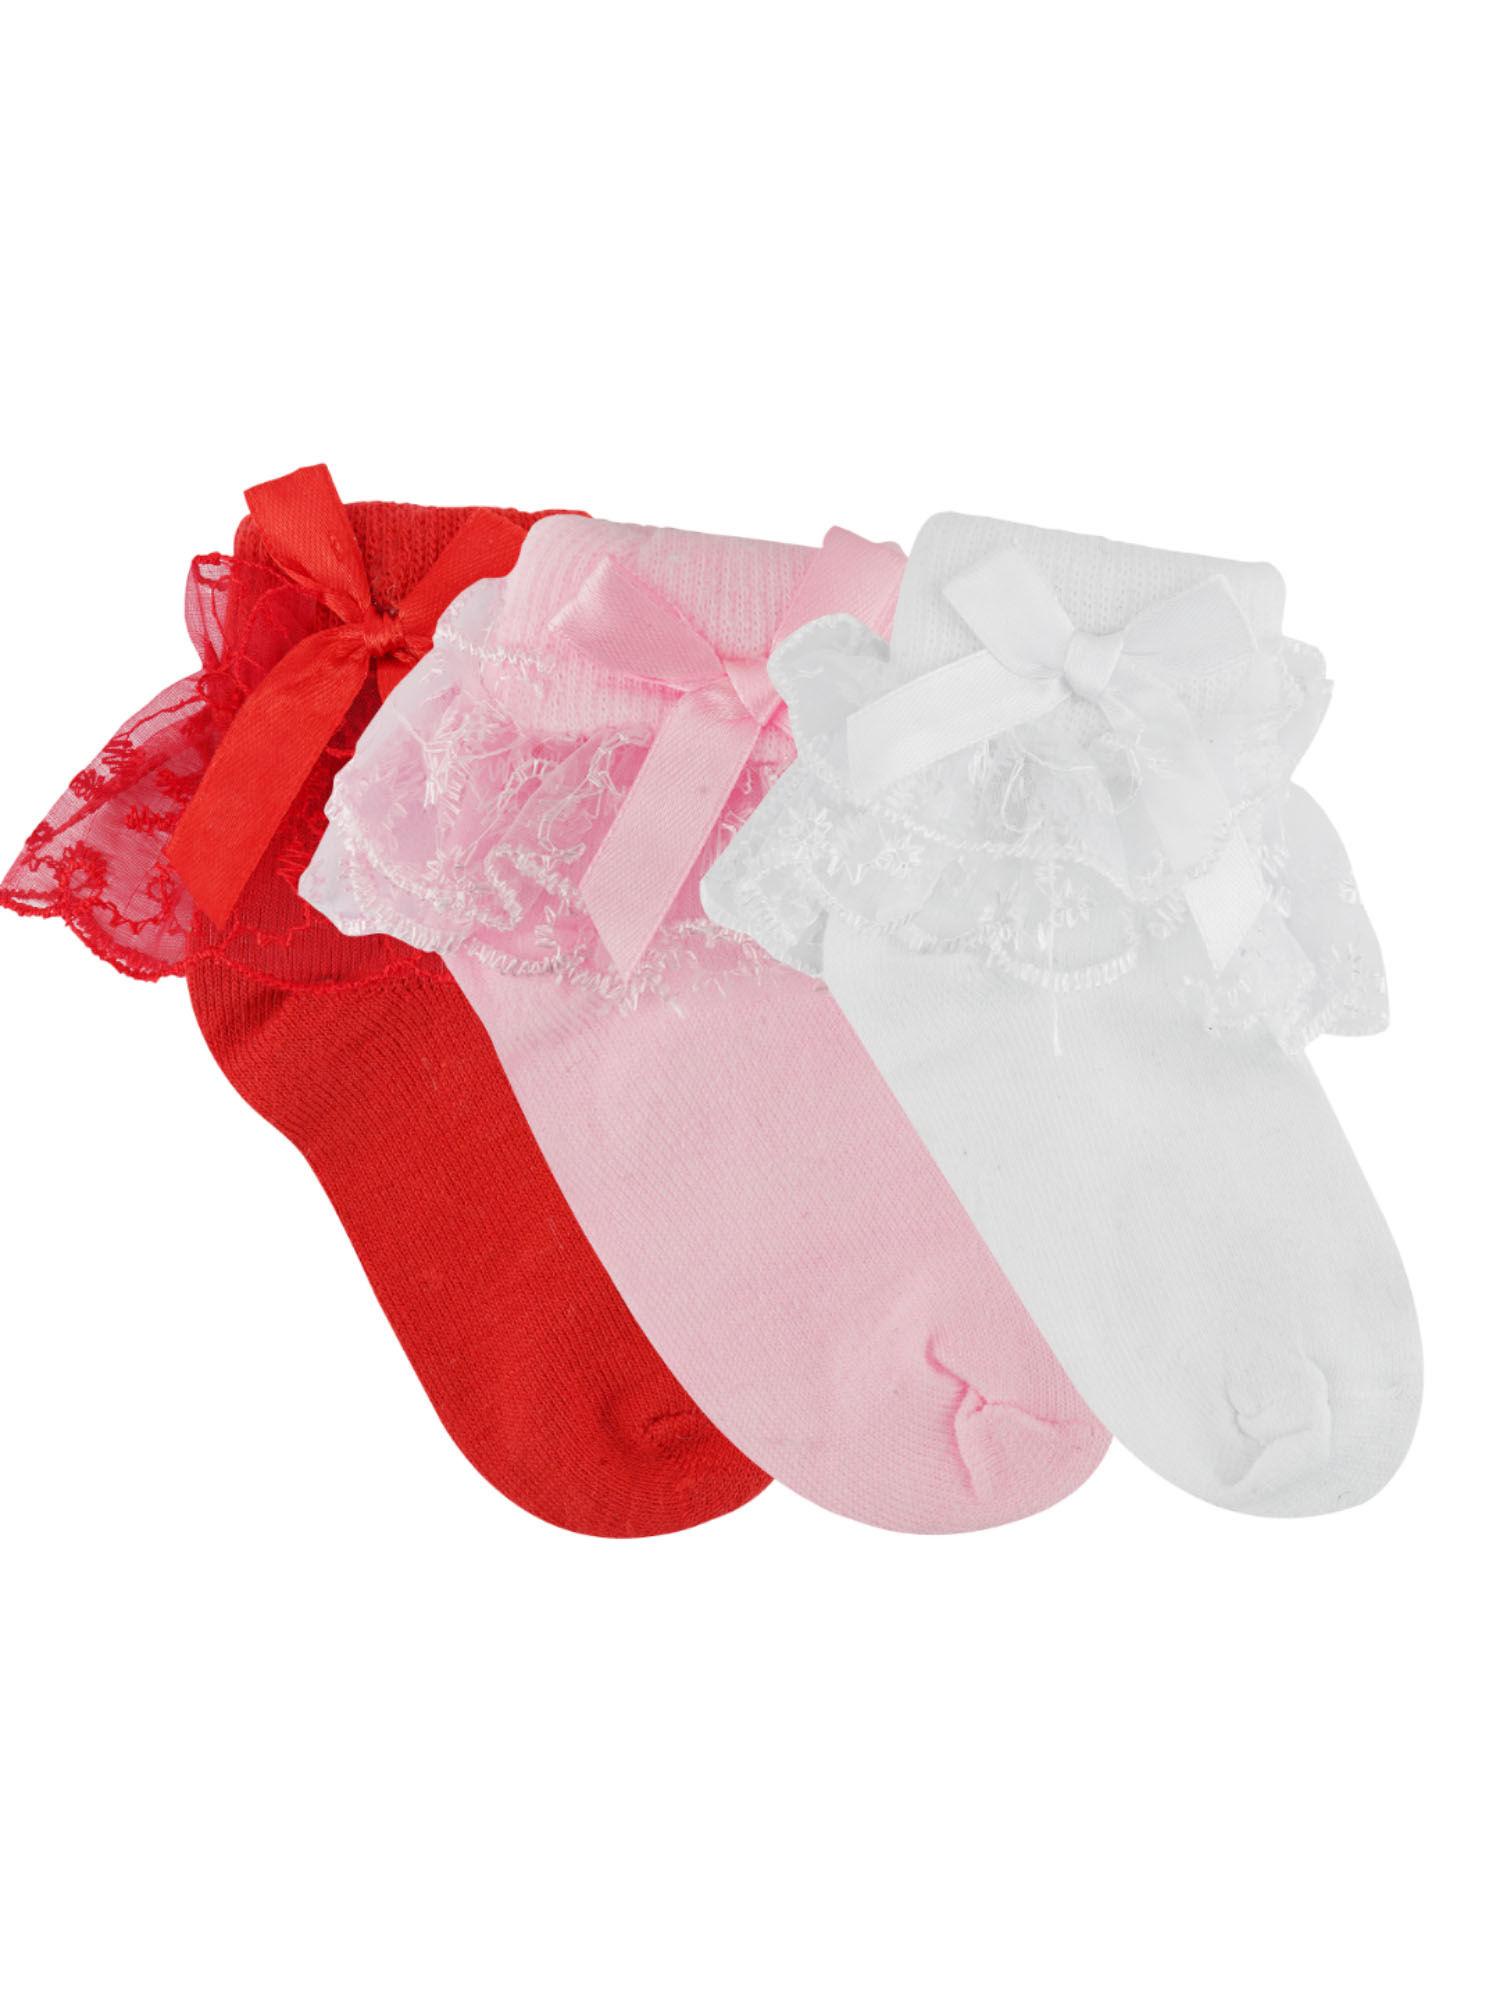 Girls Red-white-baby pink Floral Socks (Pack of 3)